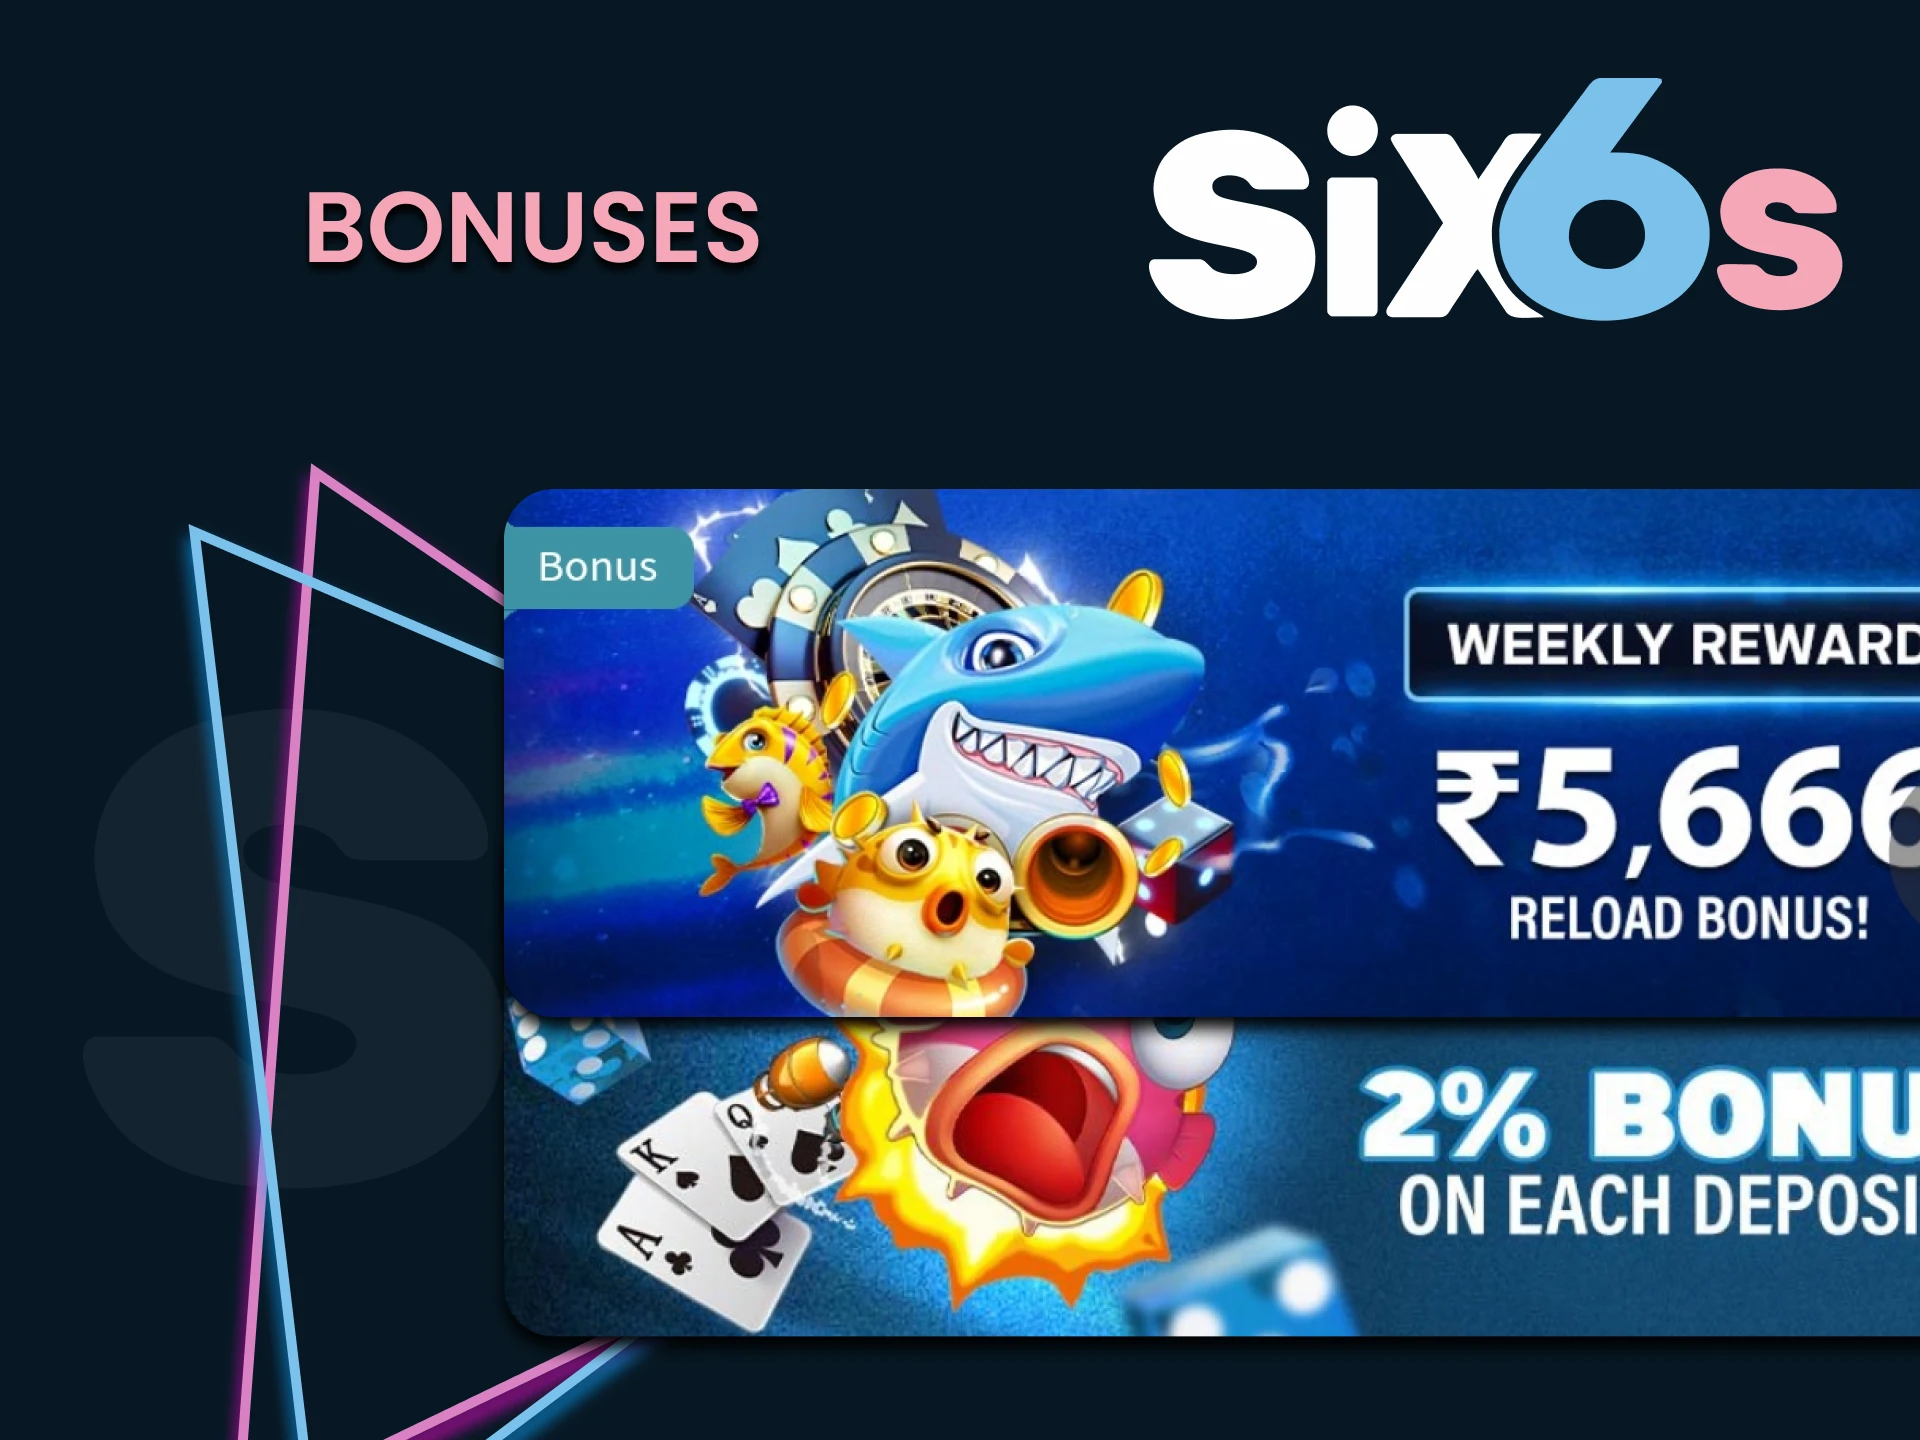 Find out about all bonuses at Six6s.